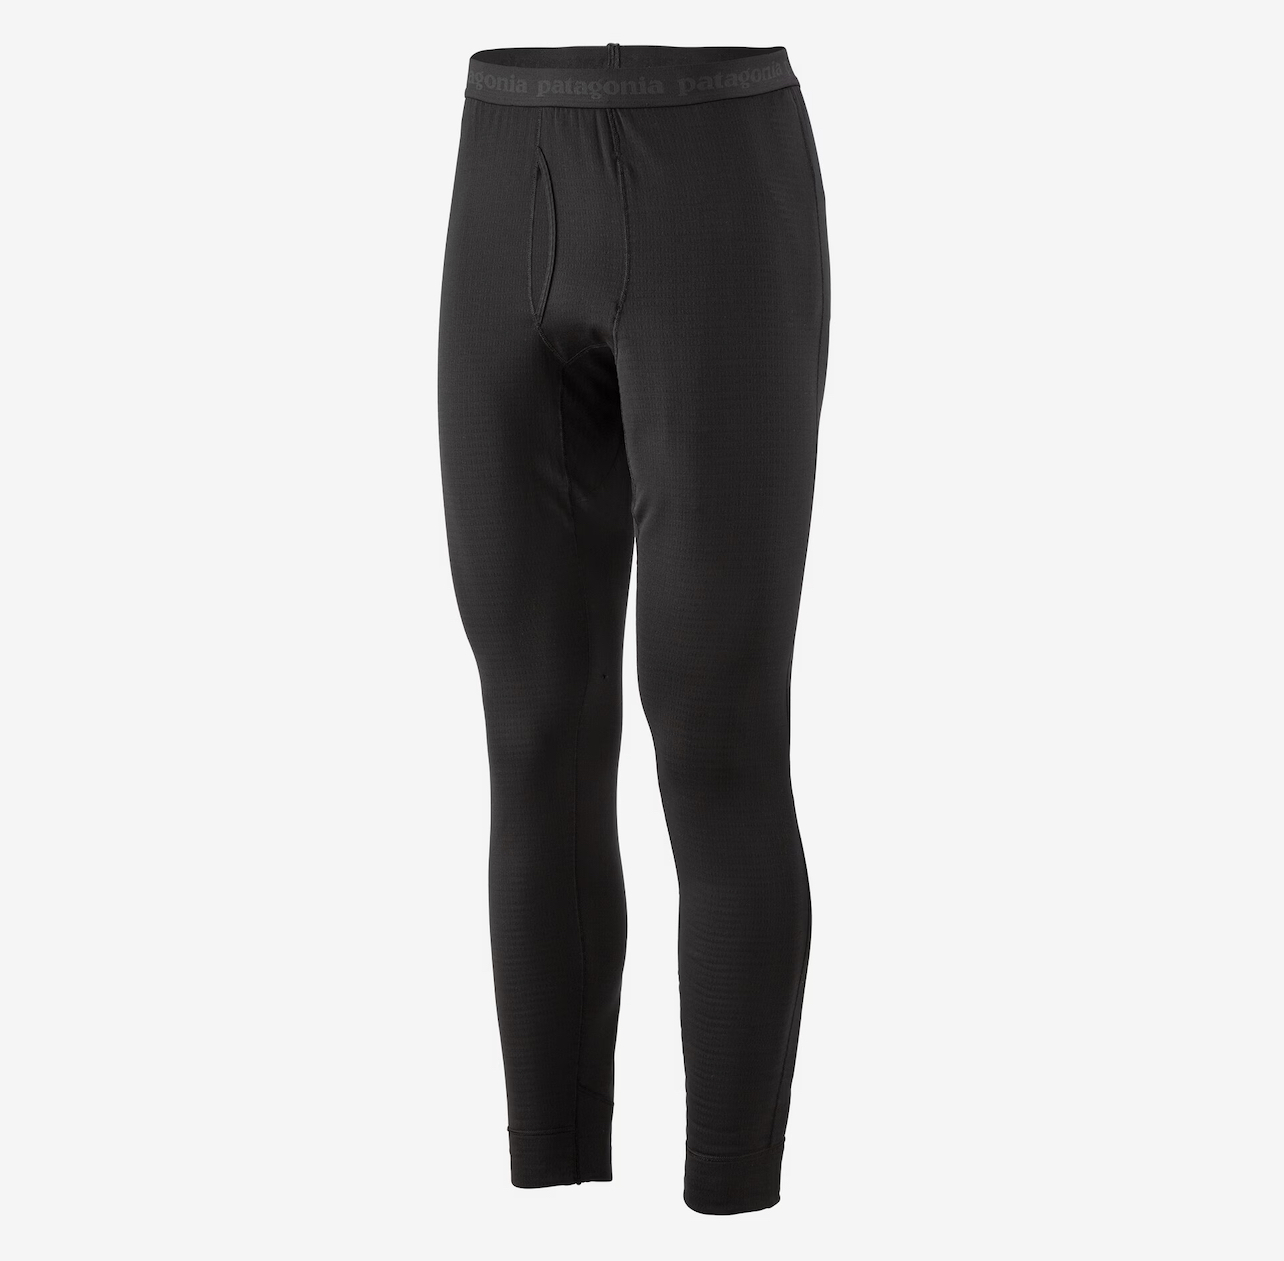 Patagonia M's Capilene Thermal Weight Bottoms - Black - XL